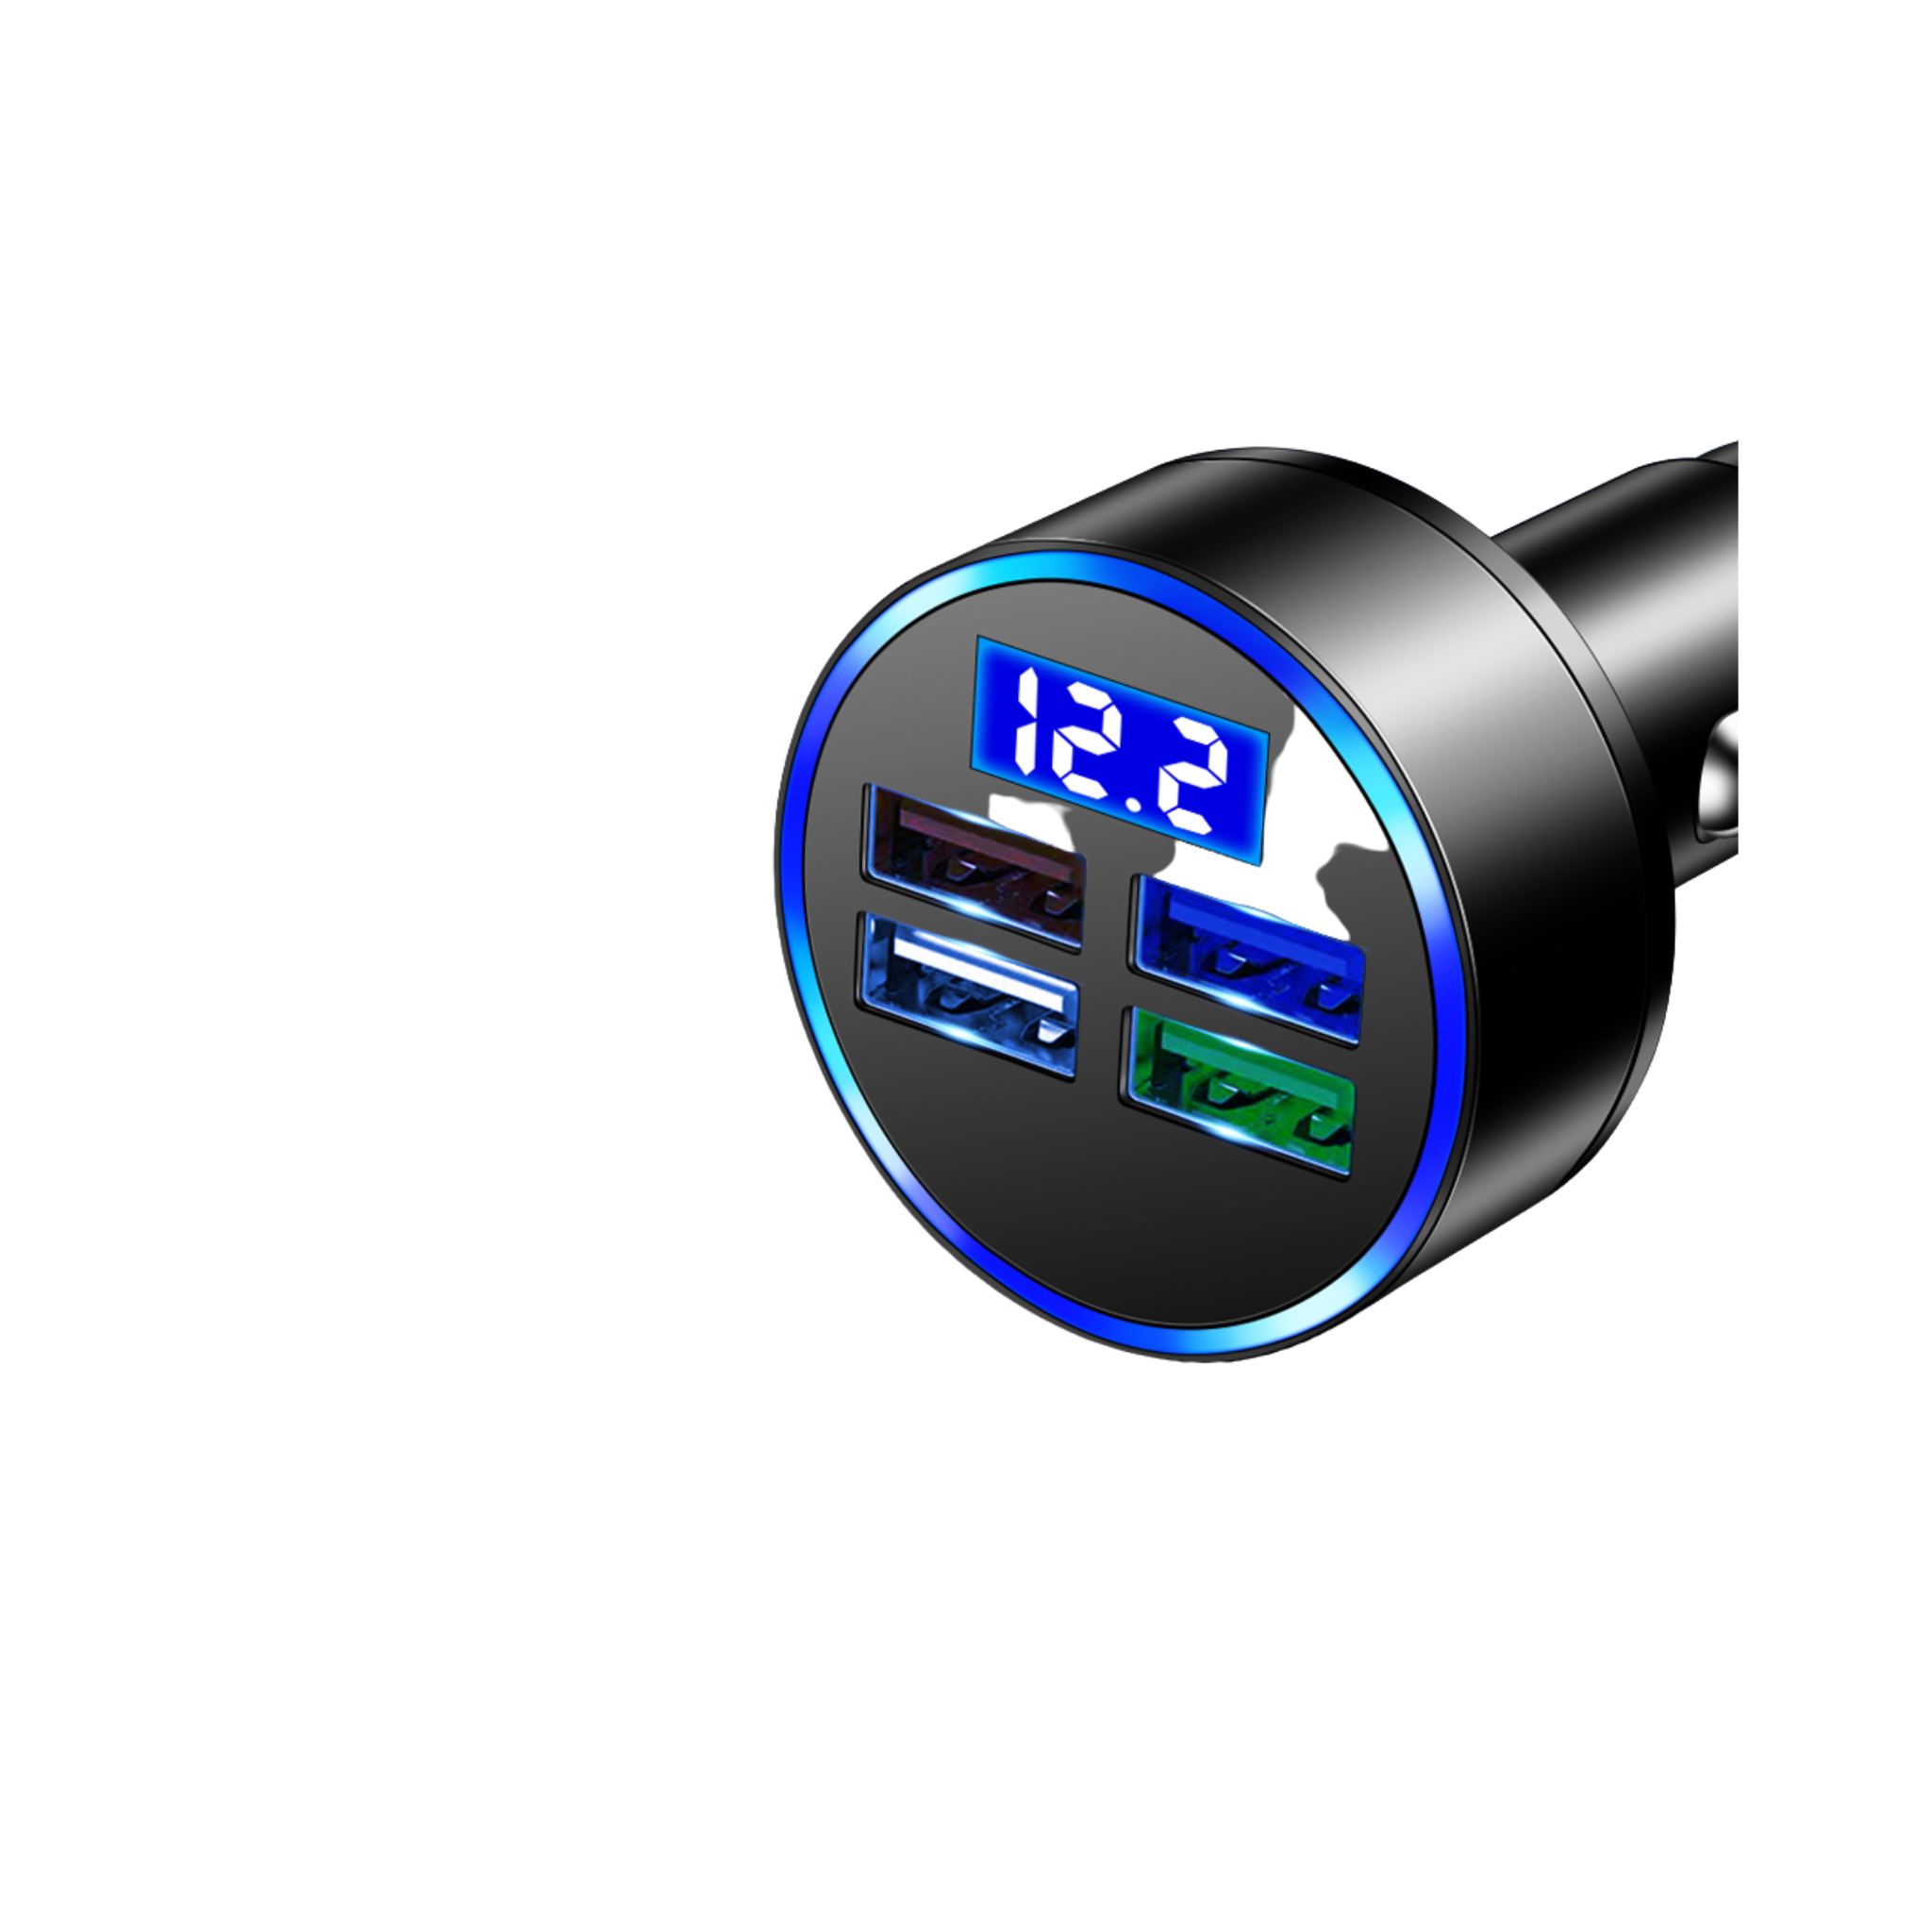 Car Charger, Led Display Lamp with Dual USB